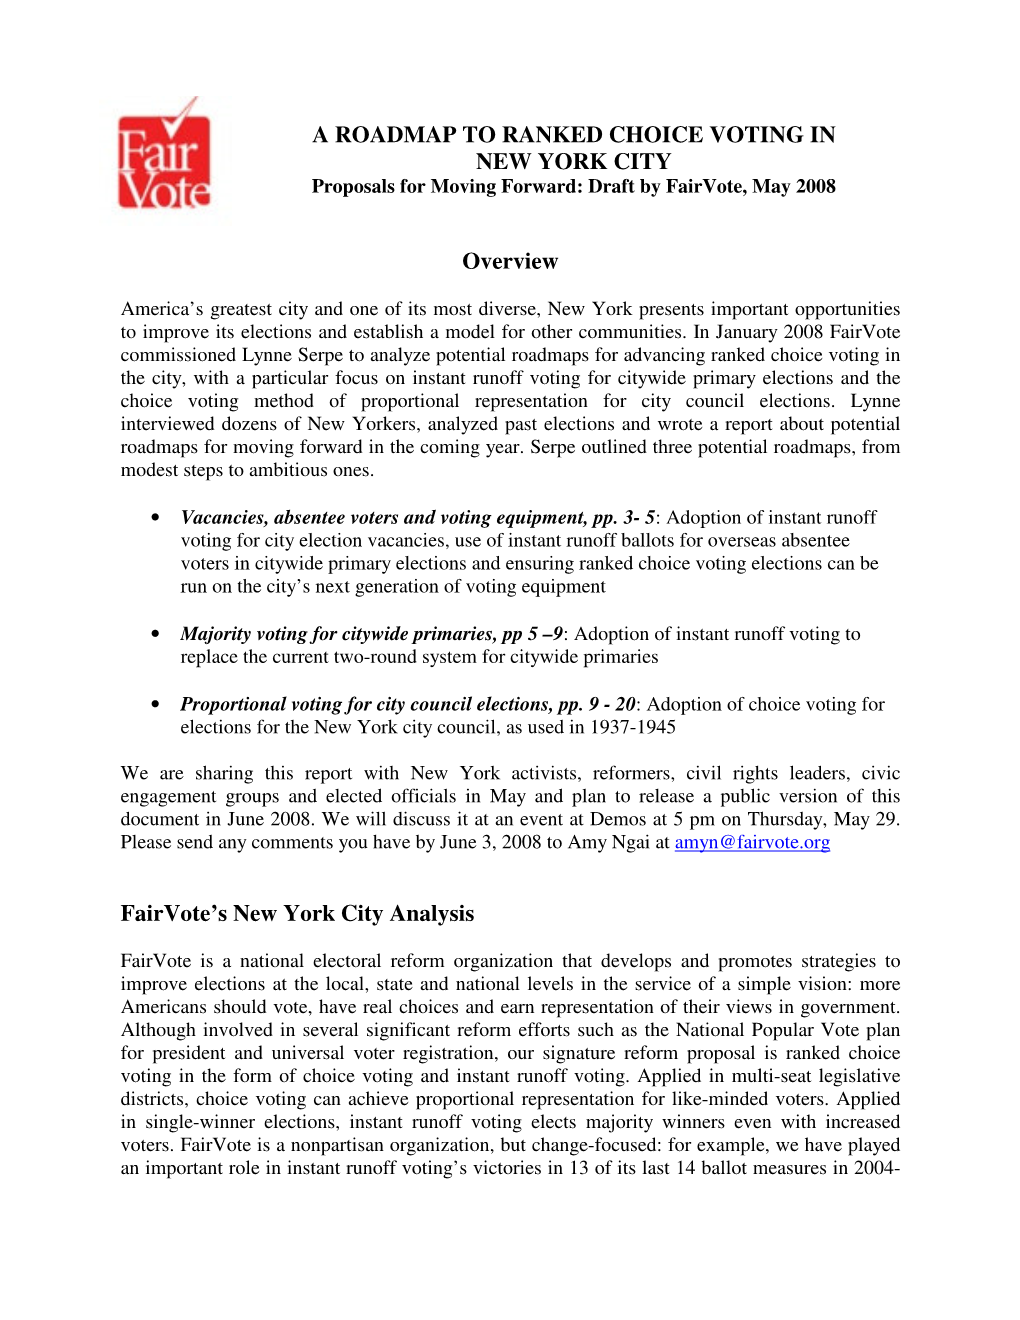 A ROADMAP to RANKED CHOICE VOTING in NEW YORK CITY Proposals for Moving Forward: Draft by Fairvote, May 2008